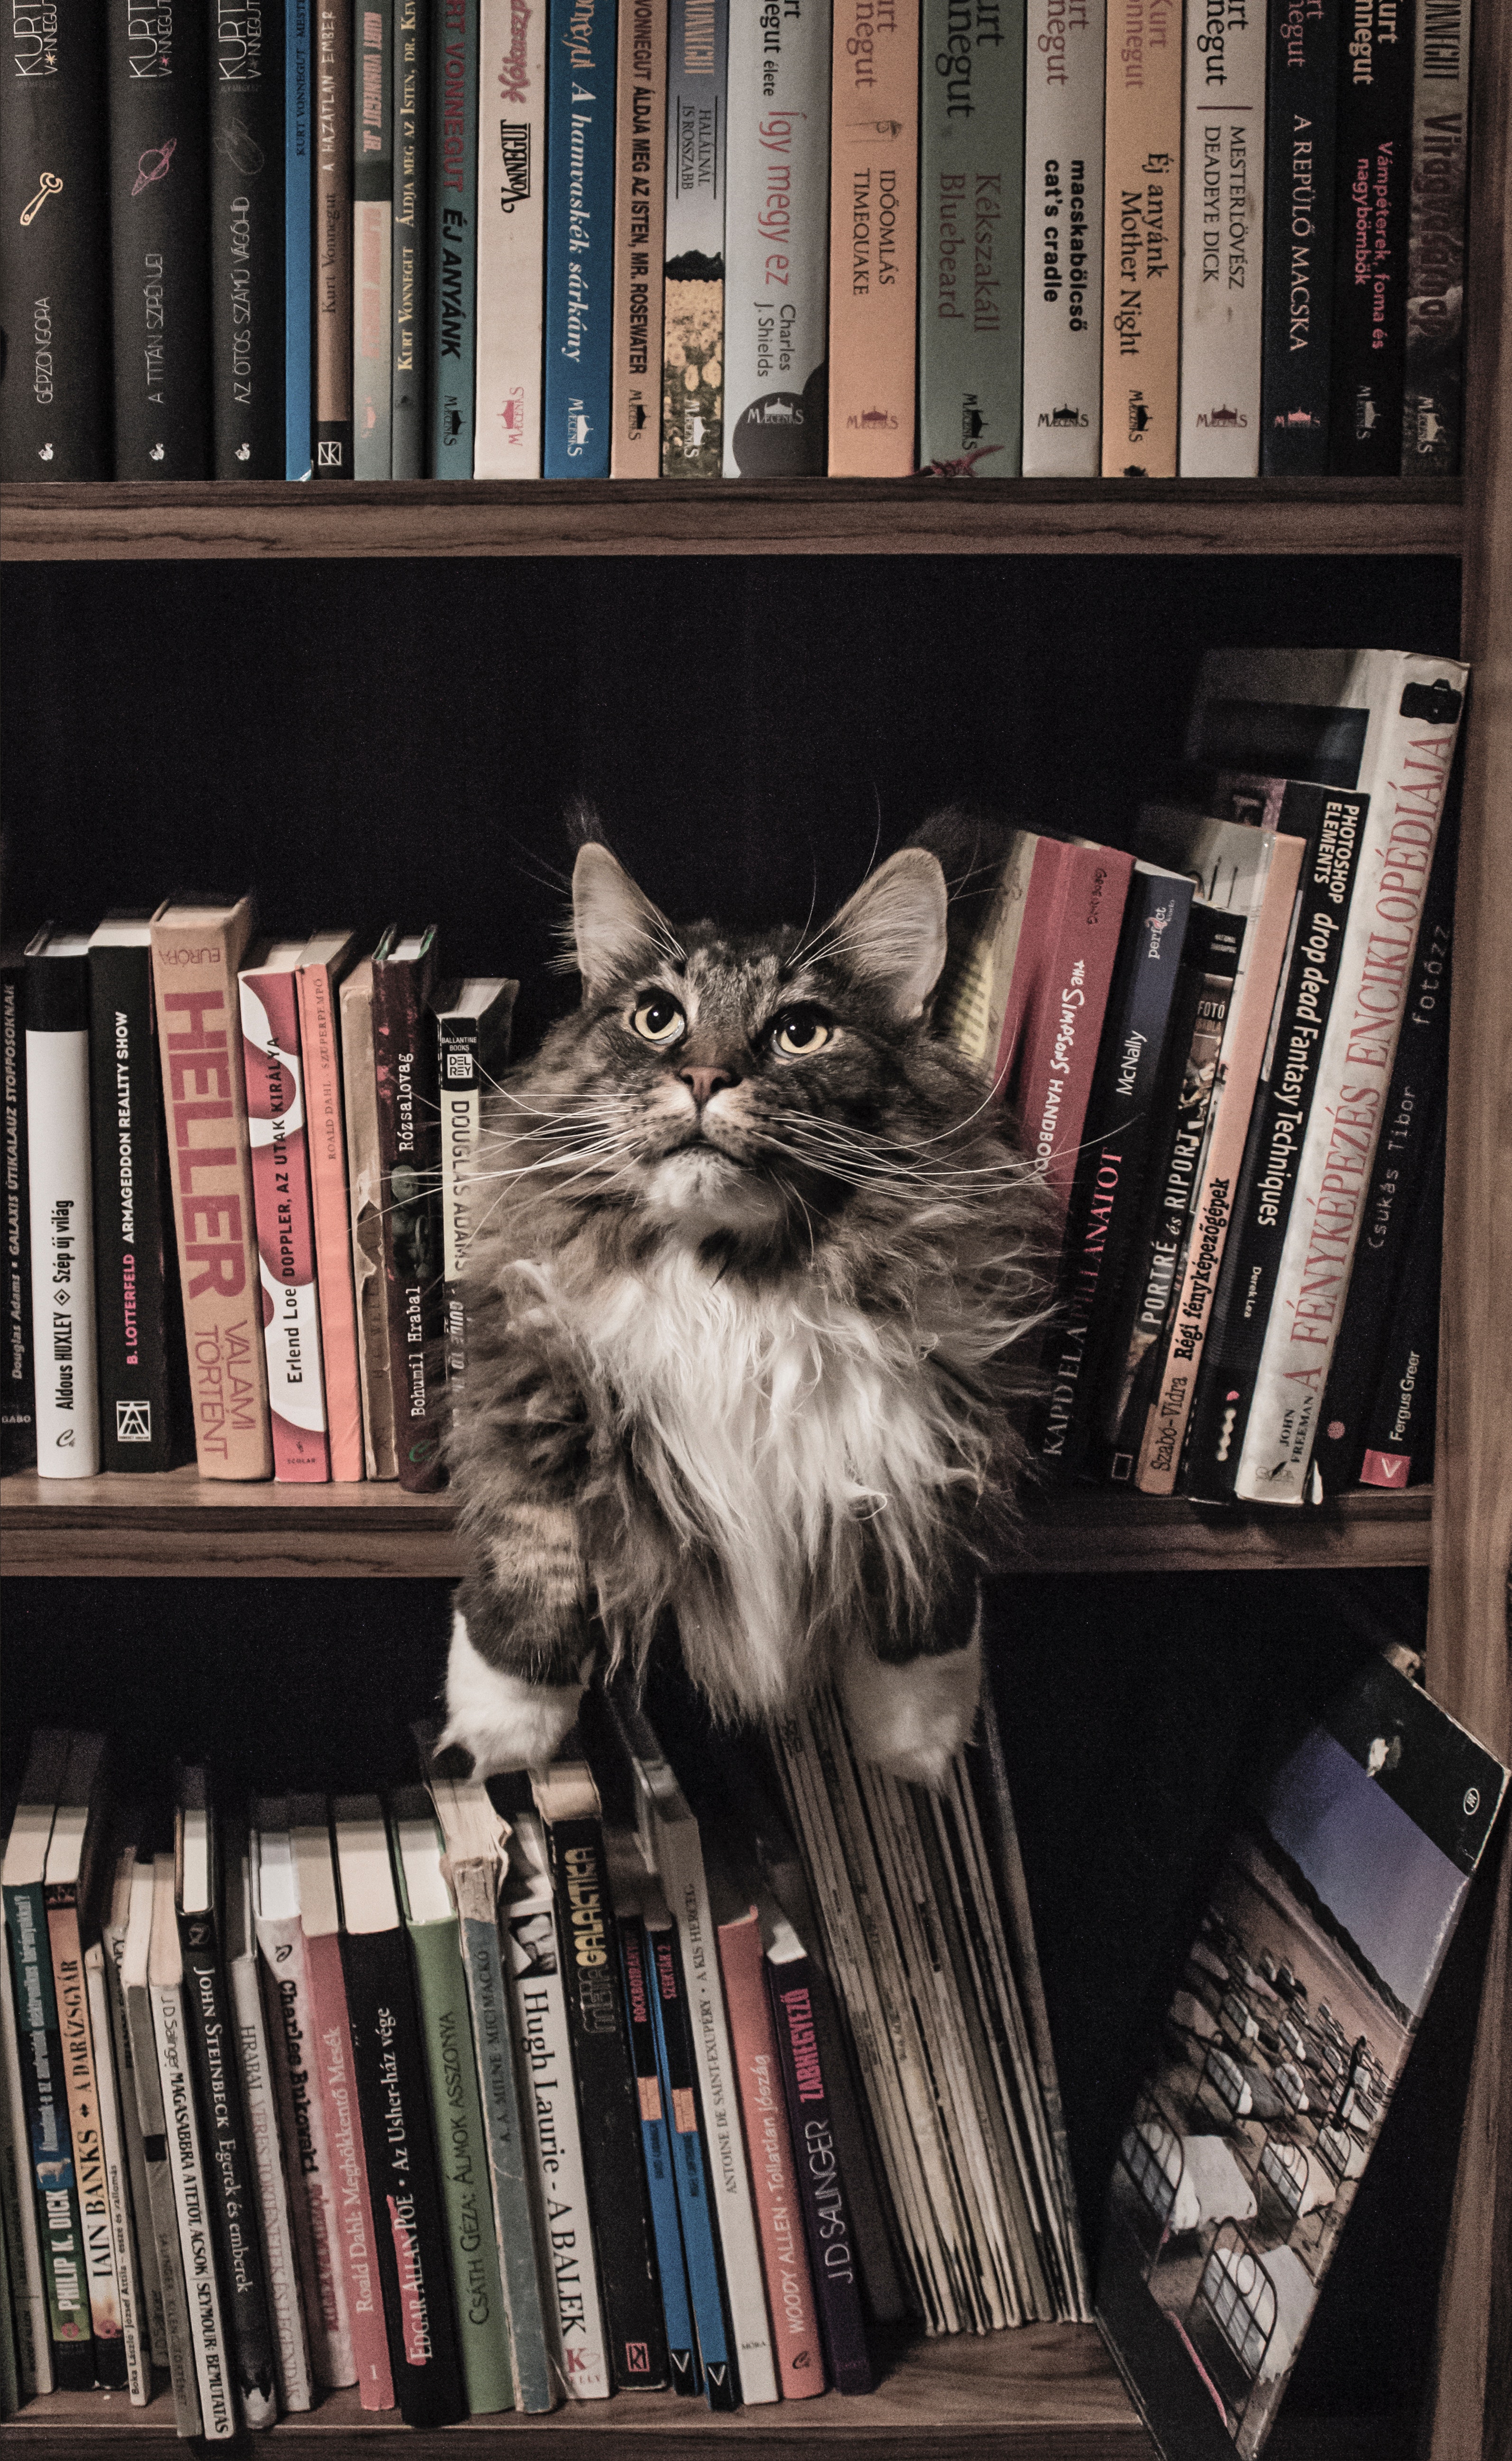 Grey and white long coated cat in middle of book son shelf photo